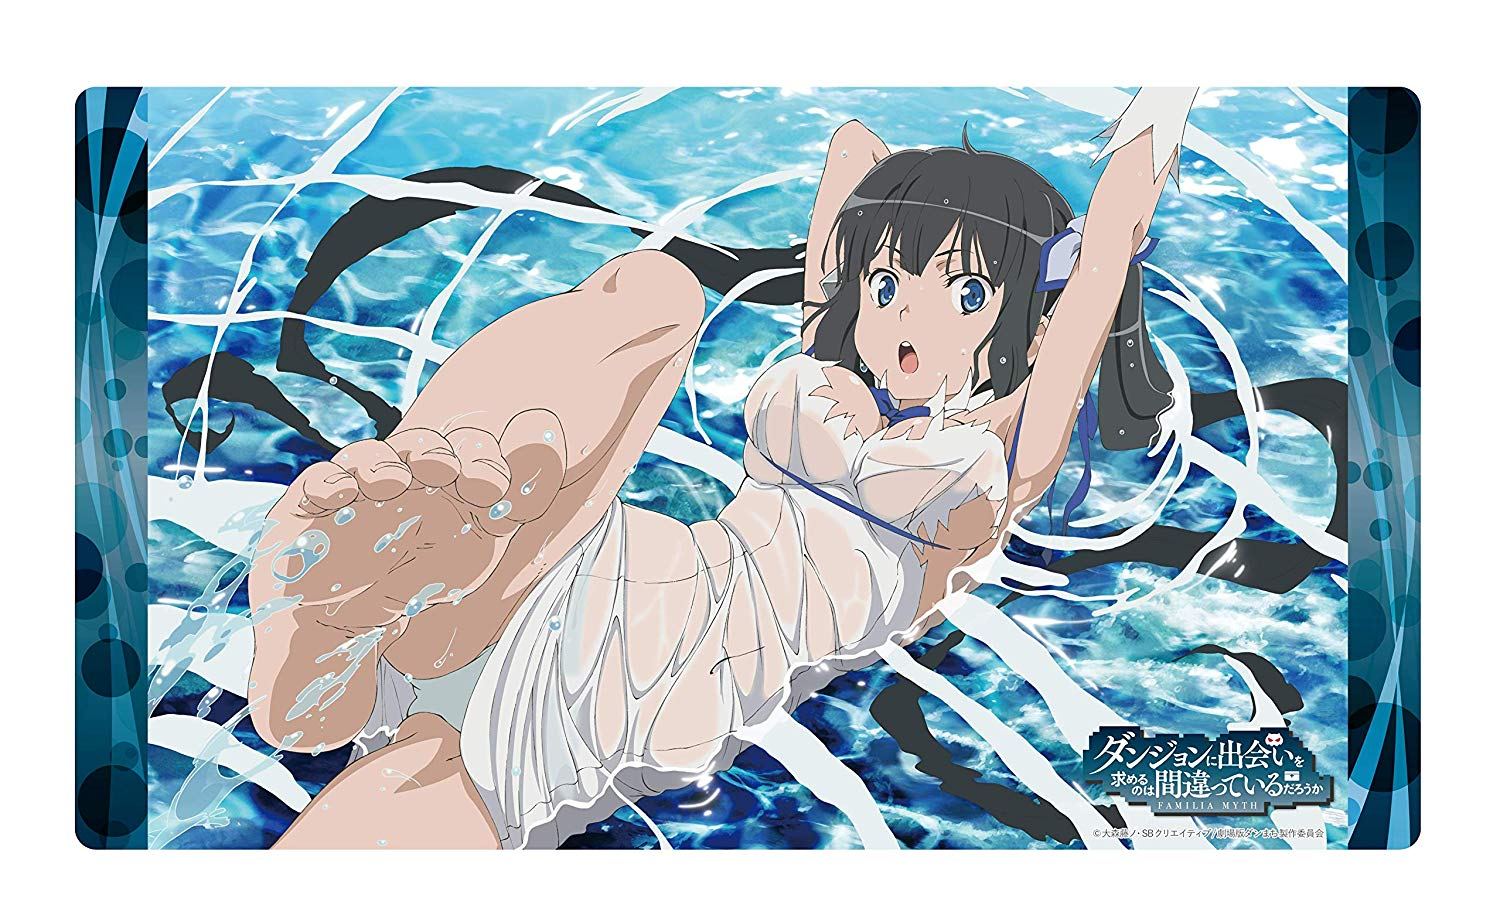 KLOCKWORX RUBBER MAT COLLECTION VOL. 31 IS IT WRONG TO TRY TO PICK UP GIRLS IN A DUNGEON?: HESTIA KlockWorx